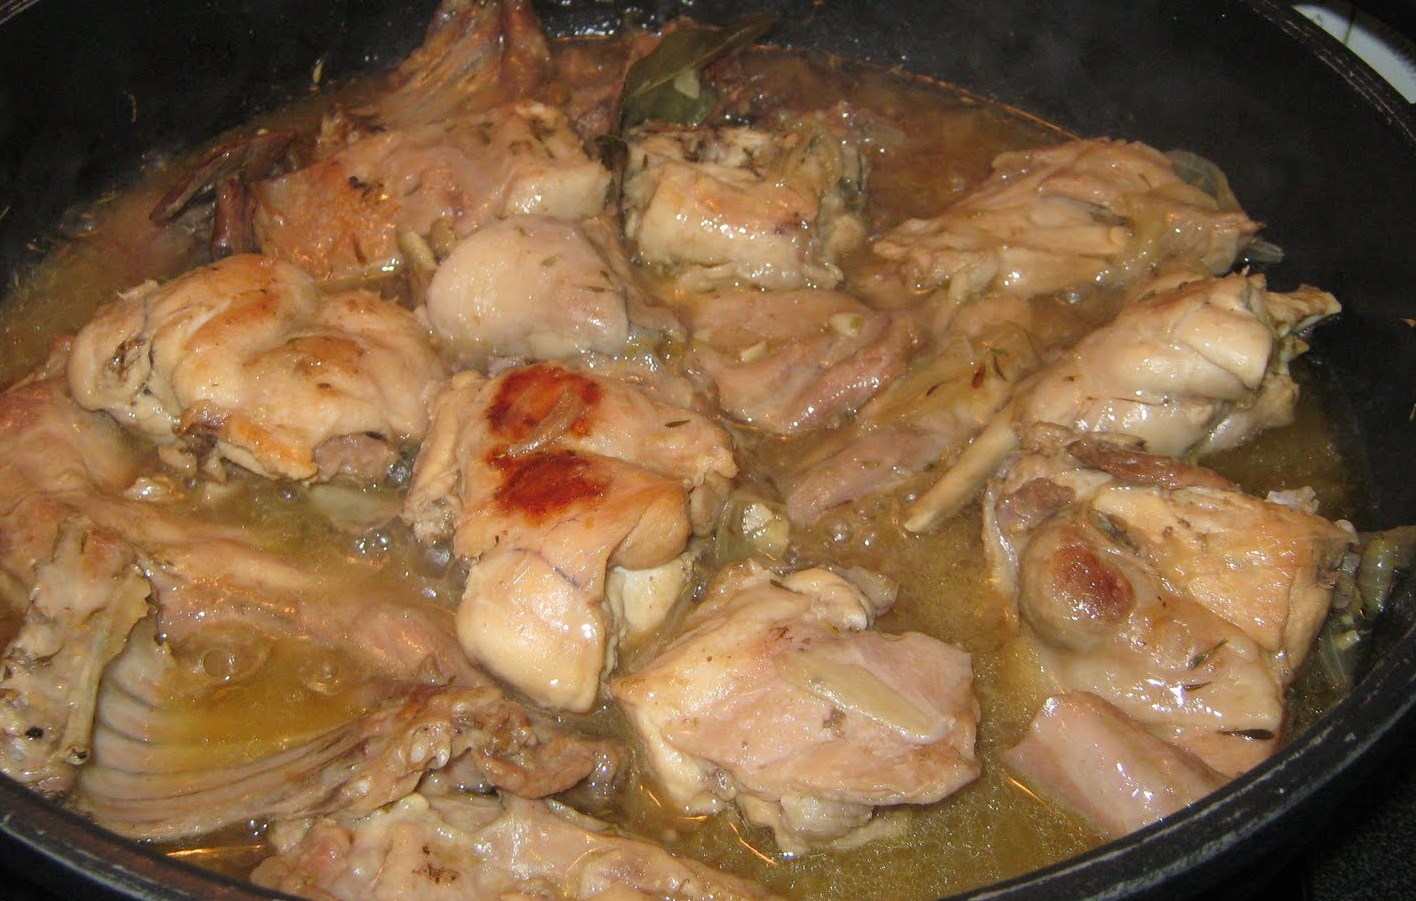 Casserole of Francolin,Partridge, Guineafowl or Doves